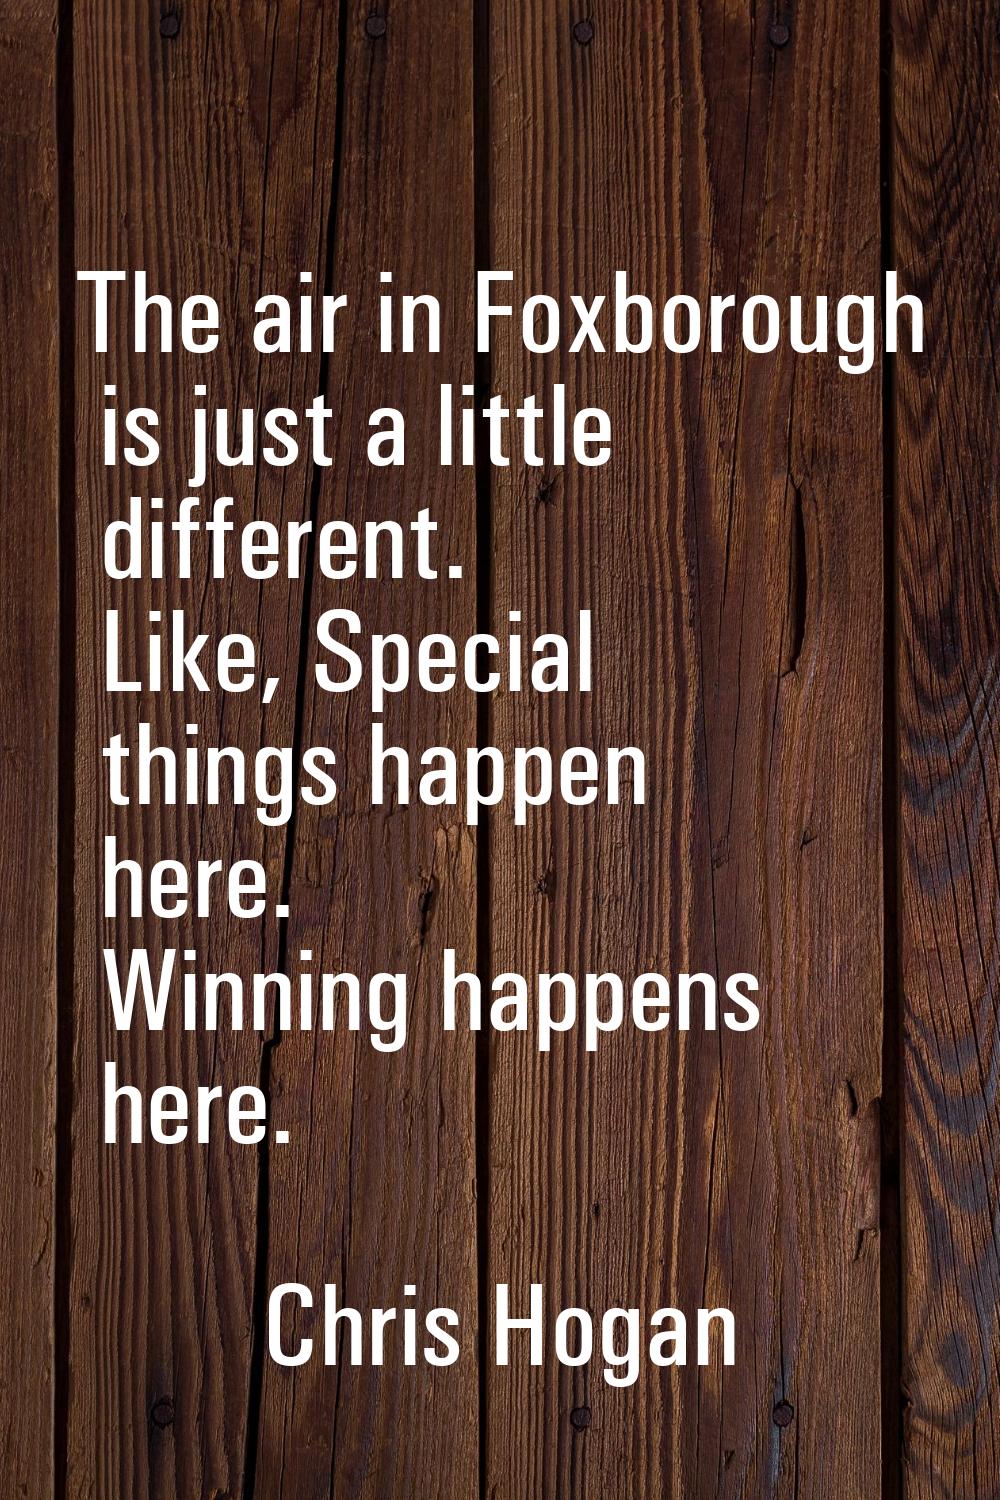 The air in Foxborough is just a little different. Like, Special things happen here. Winning happens